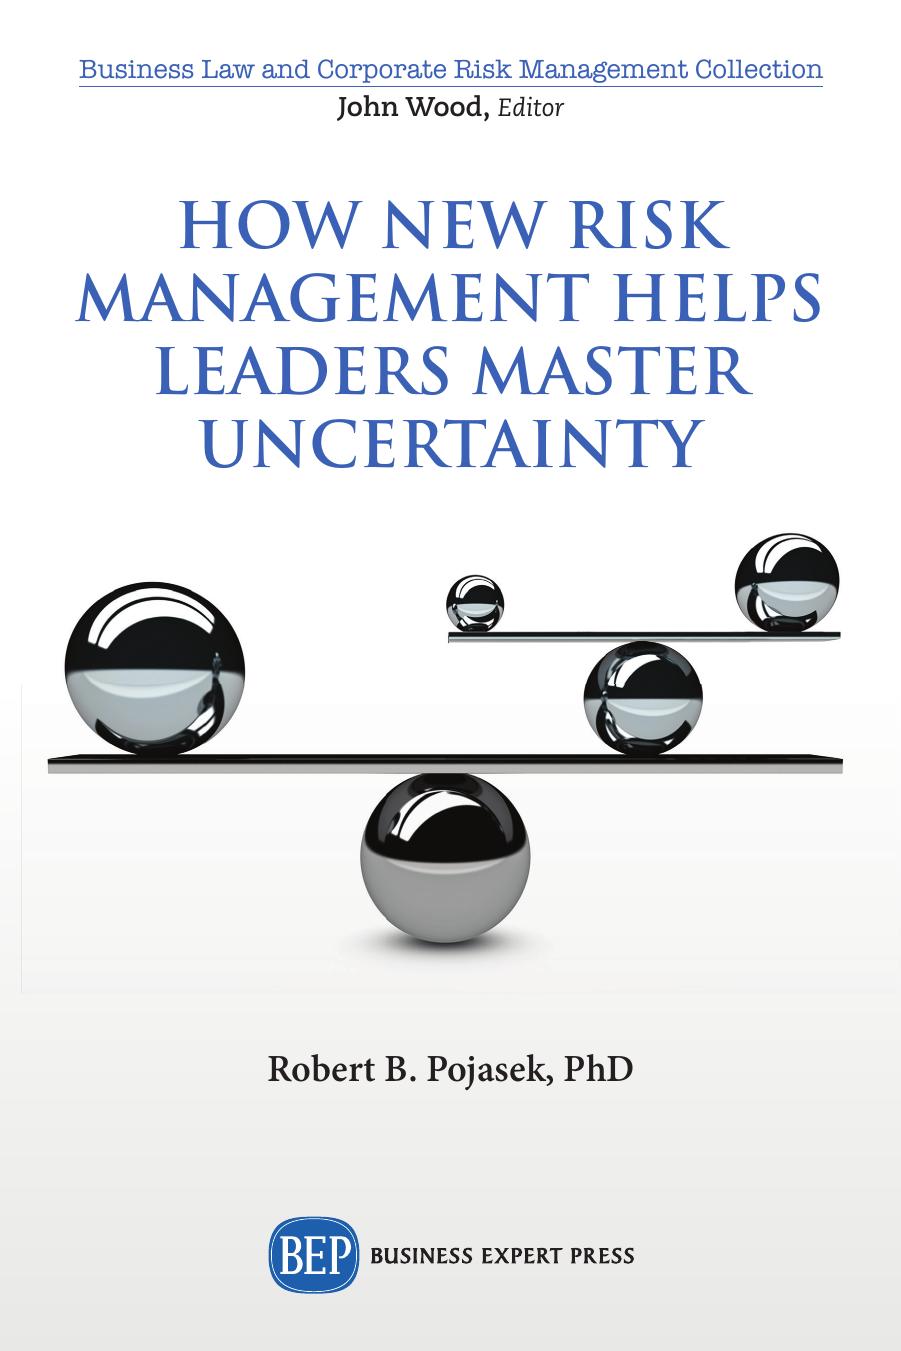 How New Risk Management Helps Leaders Master Uncertainty by Robert B. Pojasek